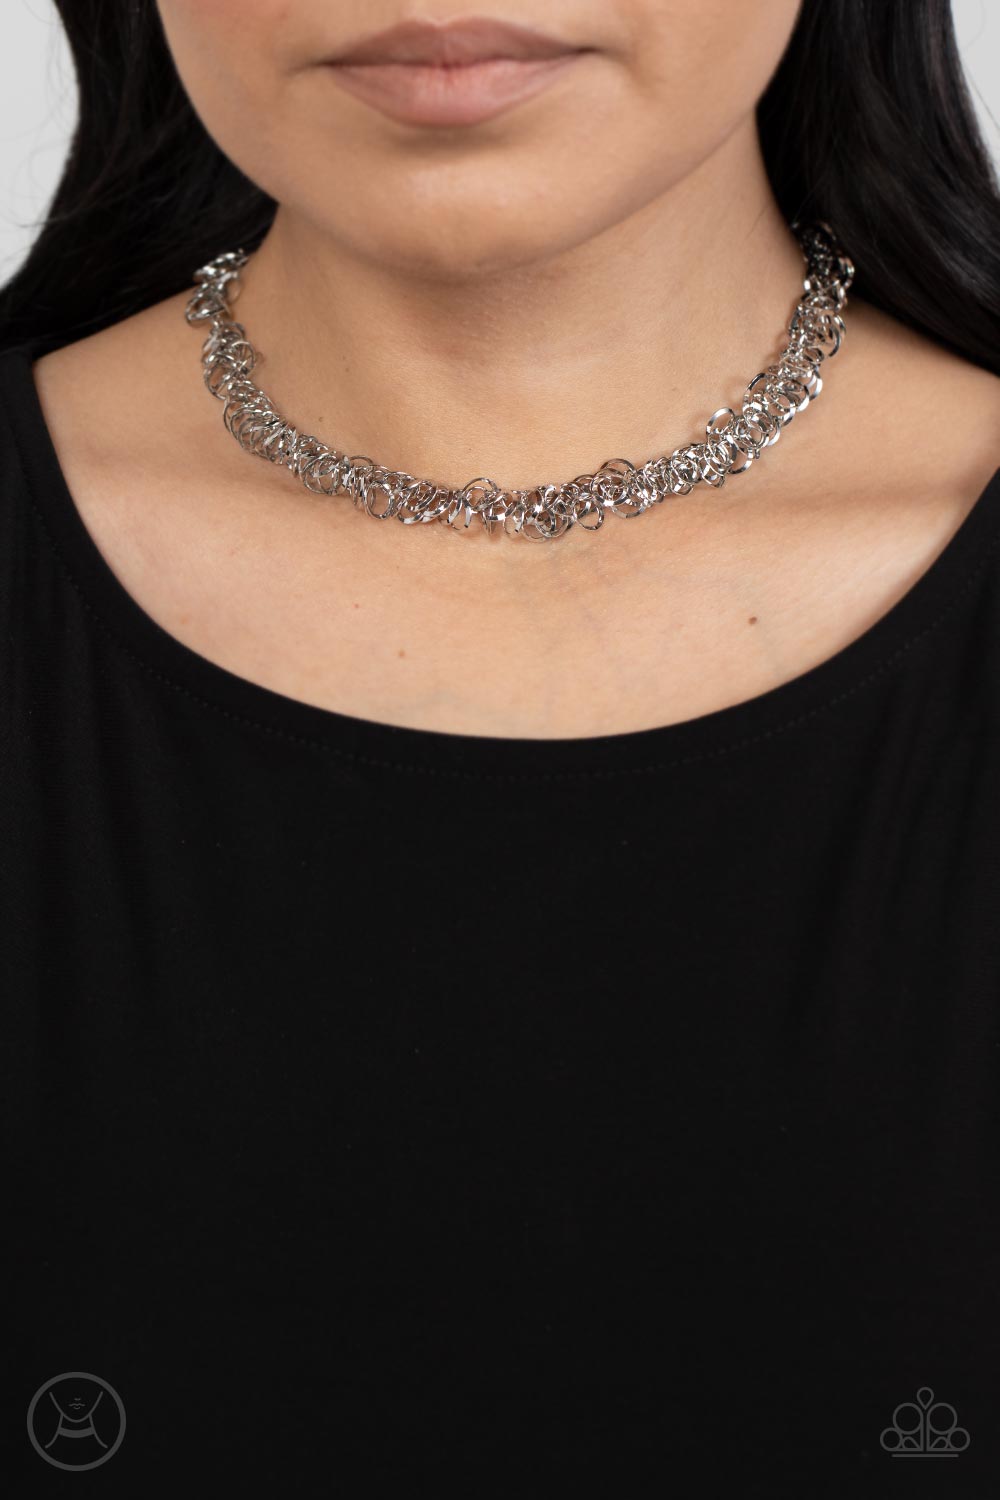 Cause a Commotion Silver Choker Necklace - Paparazzi Accessories-on model - CarasShop.com - $5 Jewelry by Cara Jewels